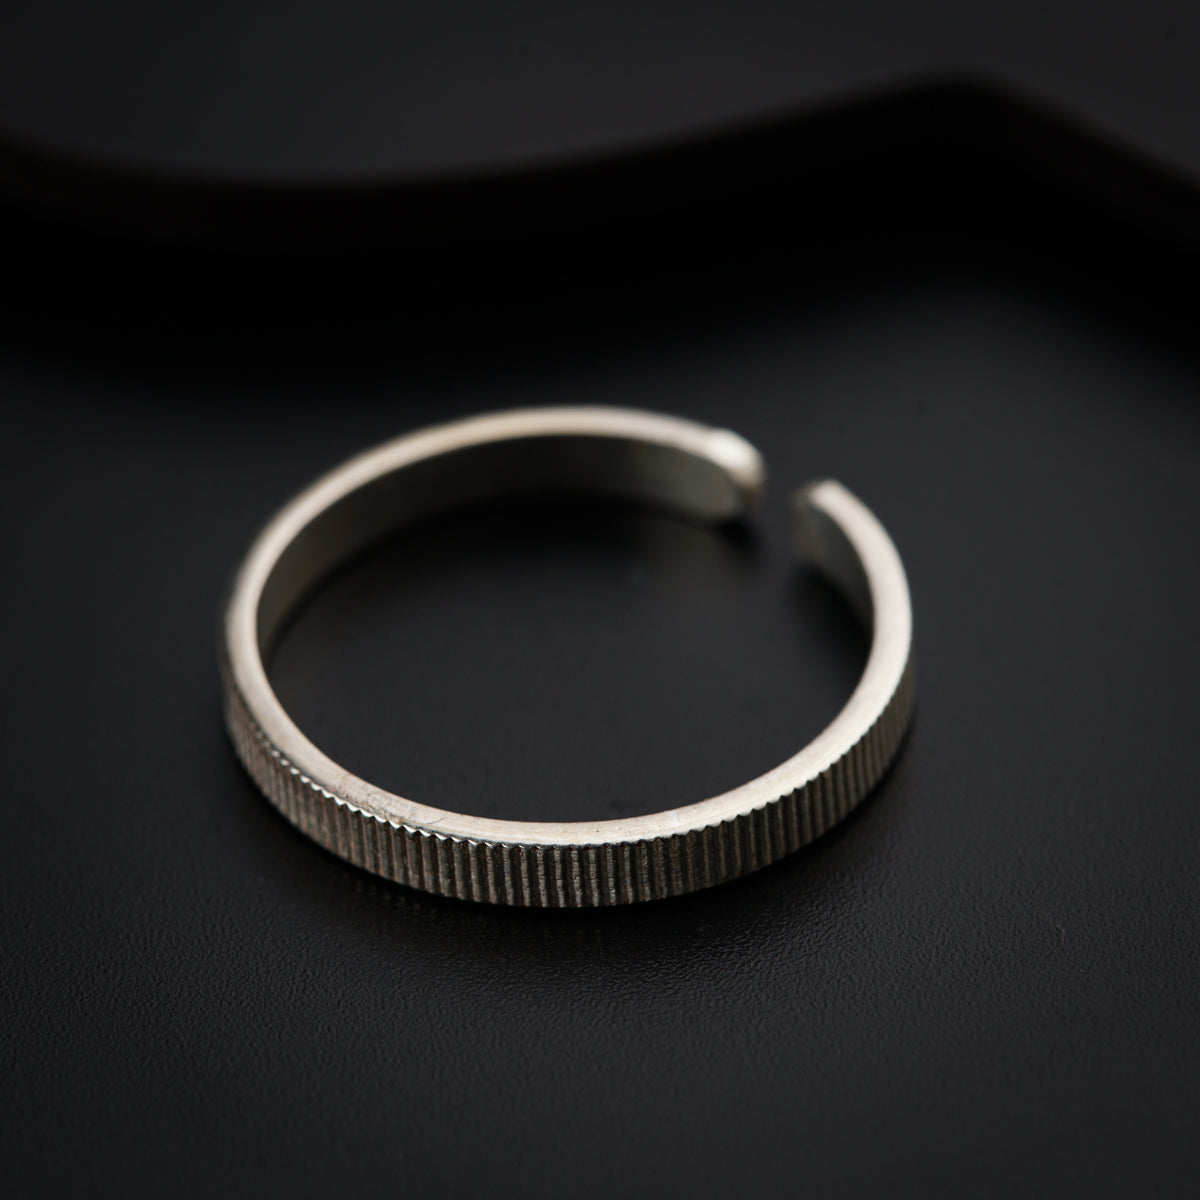 Textured ( Lines ) Couple Ring / Bands in Silver